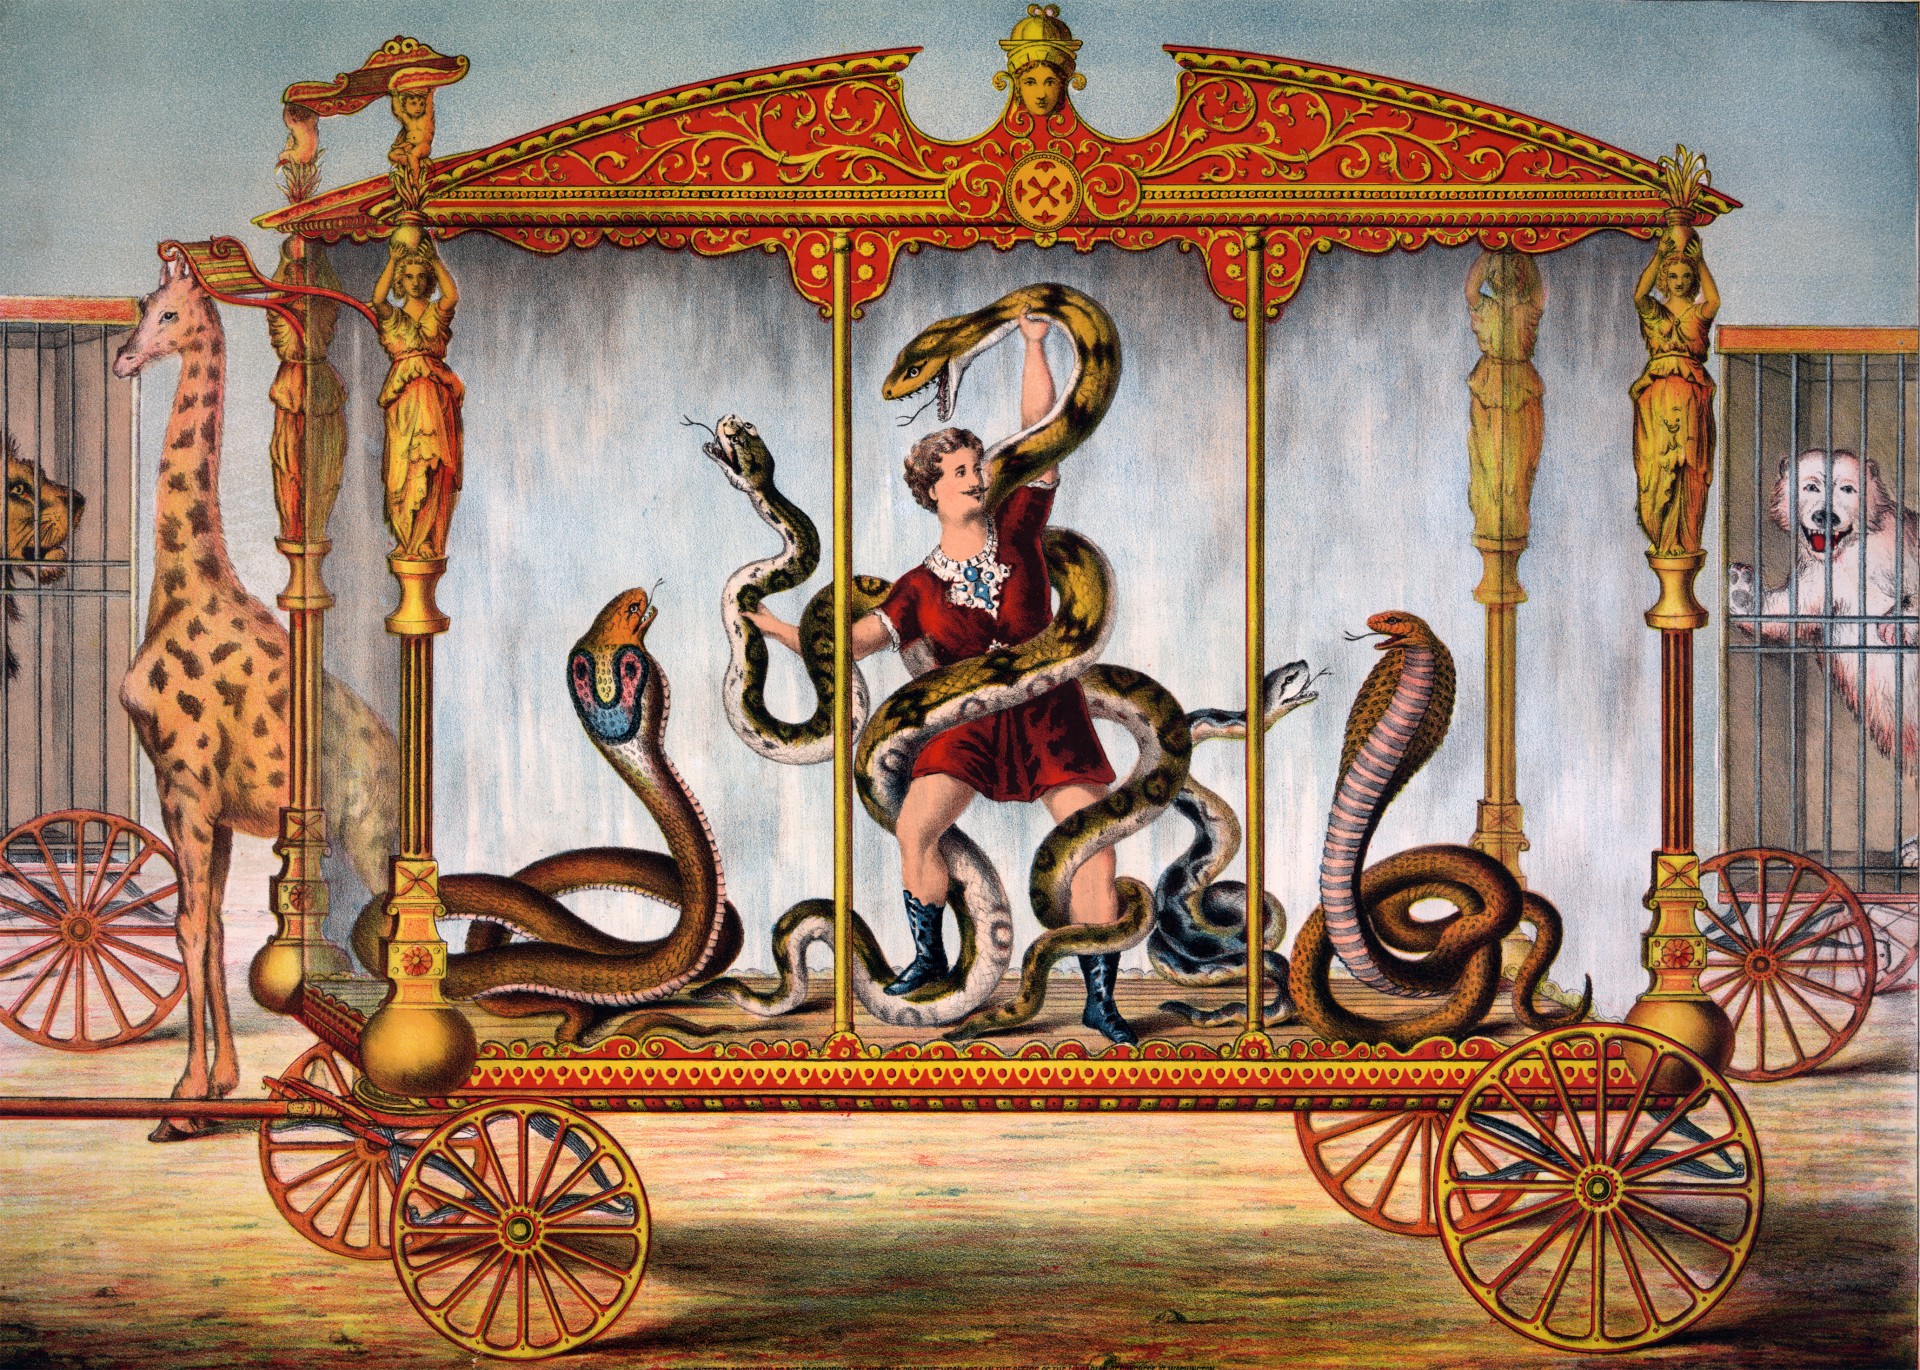 Public domain vintage illustration of a man in cage with snakes